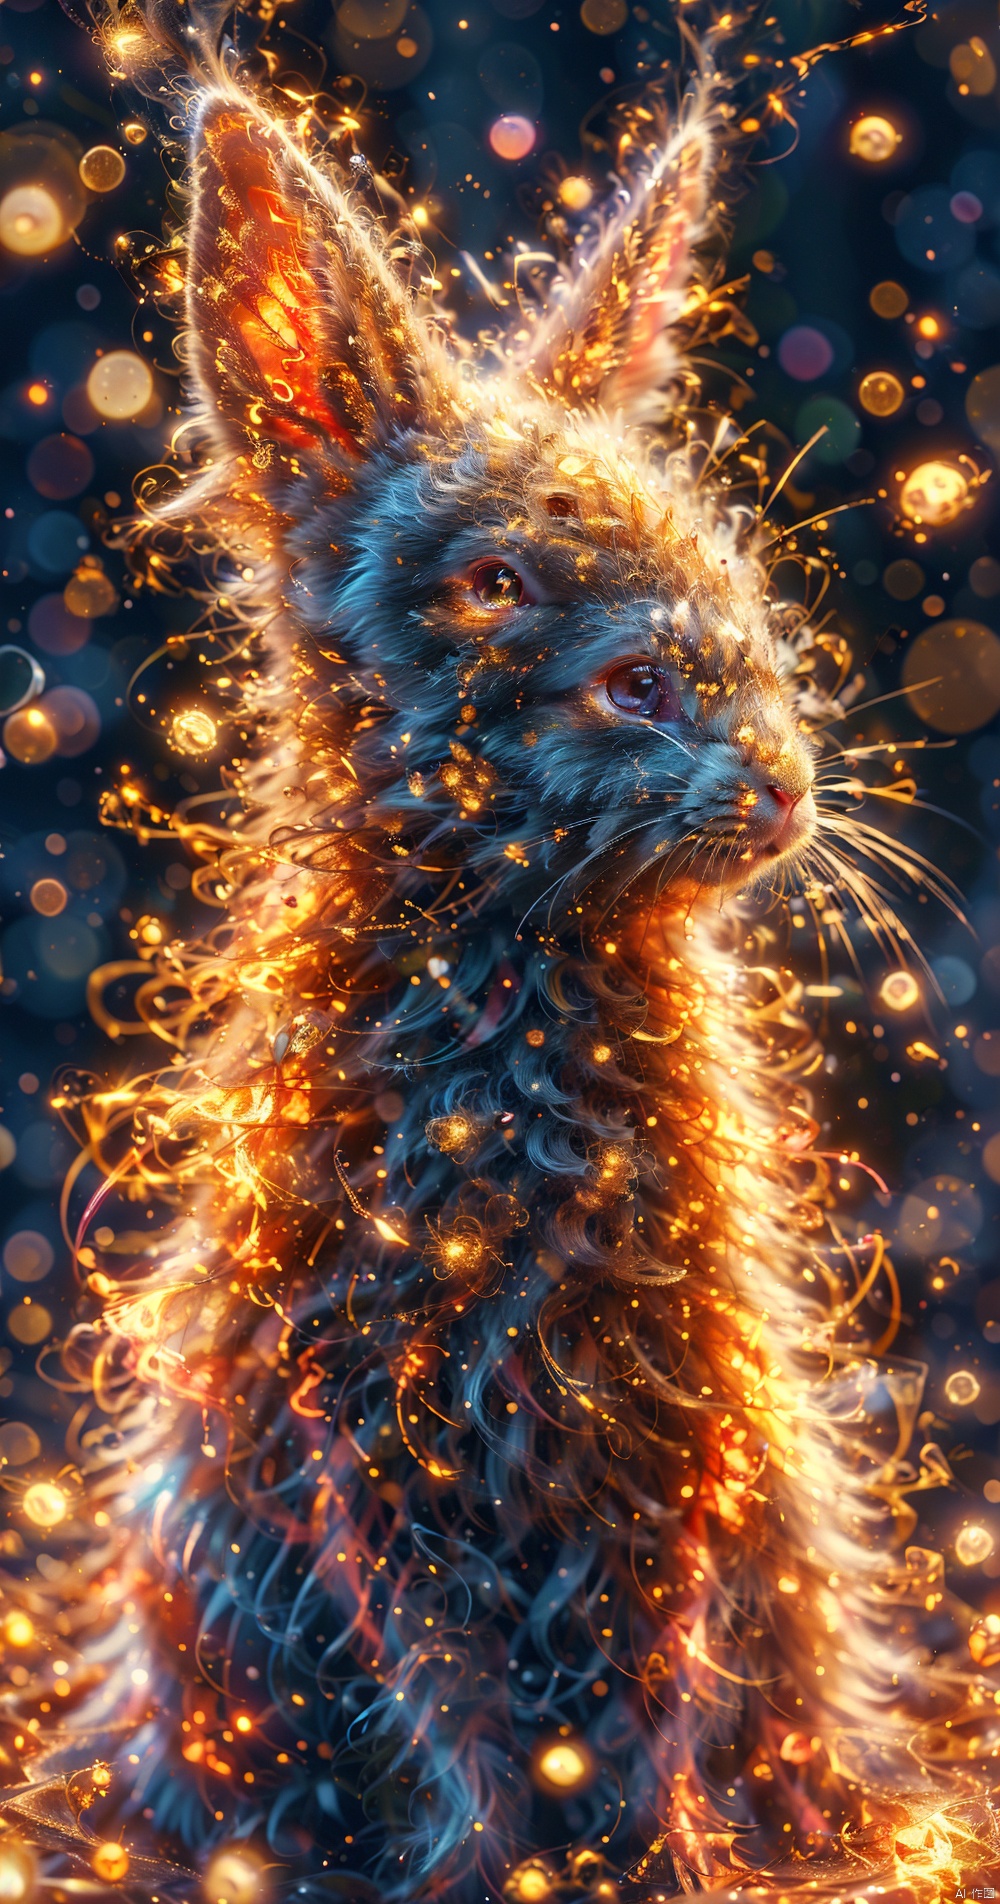  Rabbit,Crucu,The whole body,flame, burning,sparks,light particles,yinghuo,Colorful flames, blue_zhangyu, Nohumans,流光